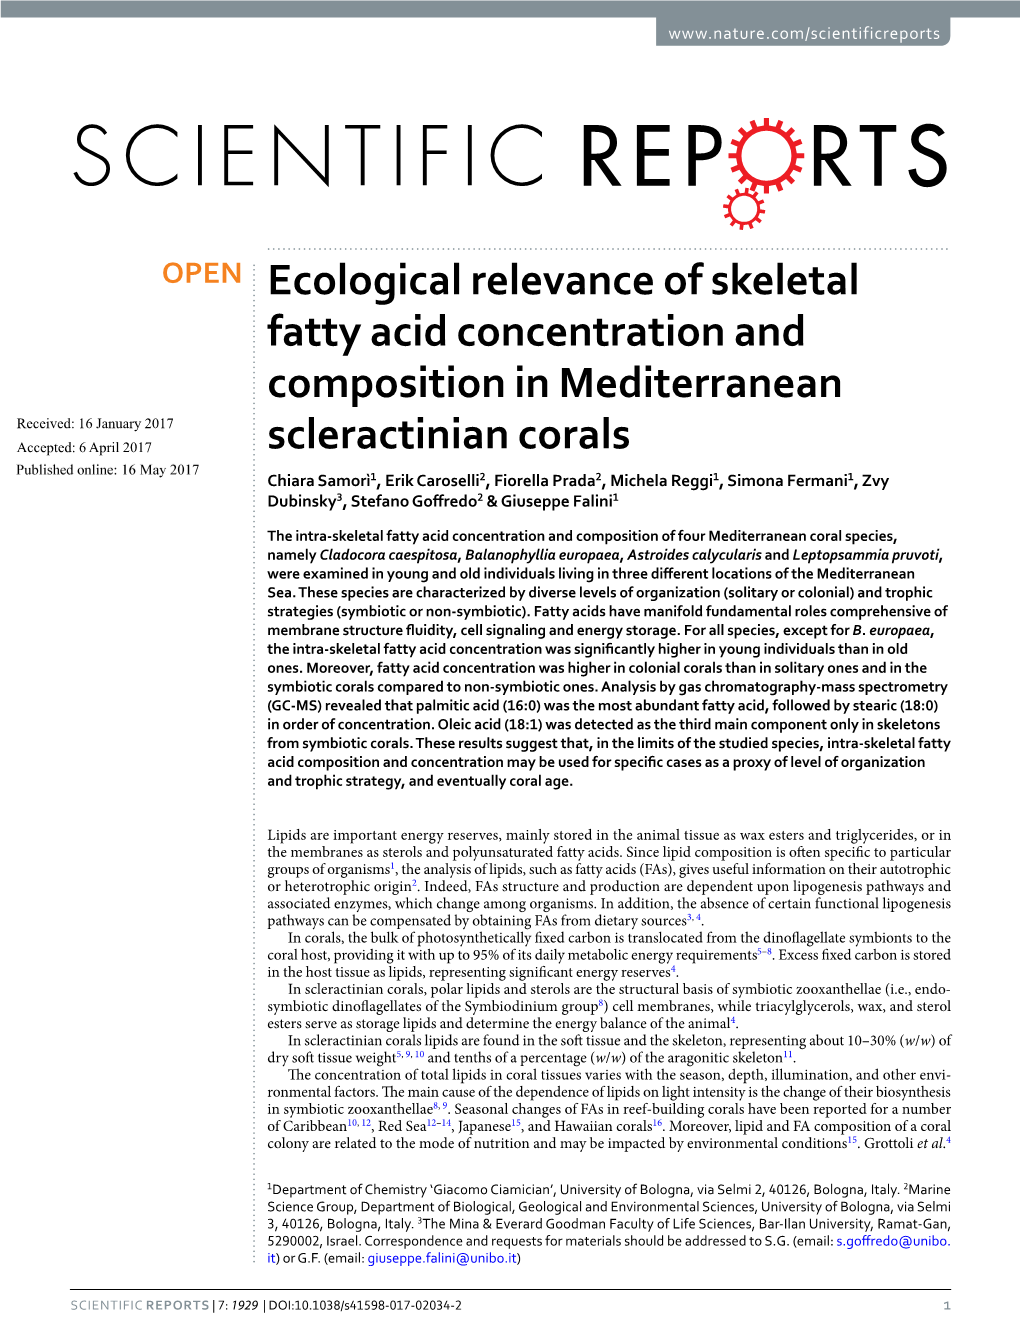 Ecological Relevance of Skeletal Fatty Acid Concentration and Composition